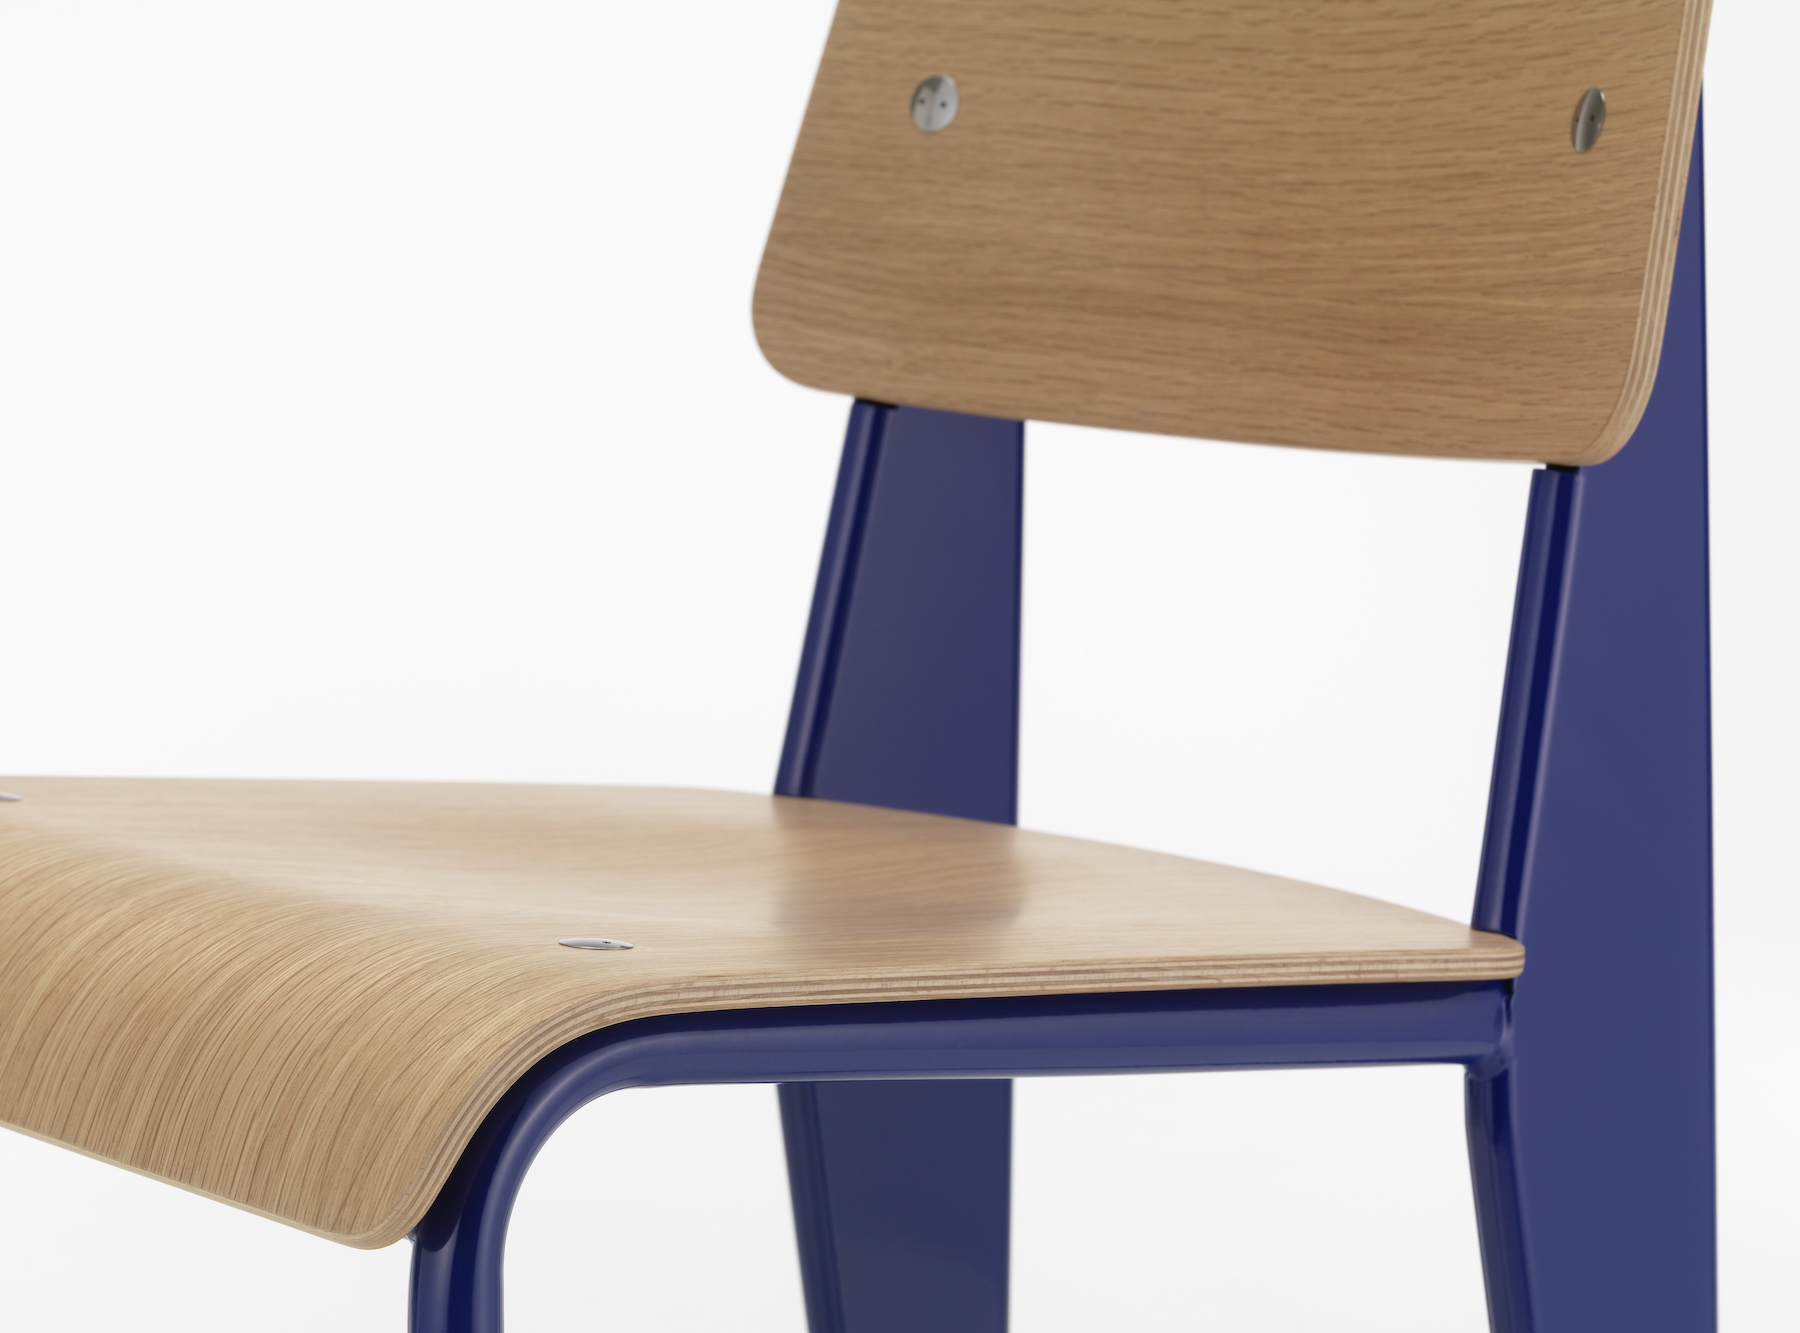 Vitra（ヴィトラ） スタンダードチェア（Standard Chair）プルーヴェブルーマルクール（Prouvé Bleu Marcoule）